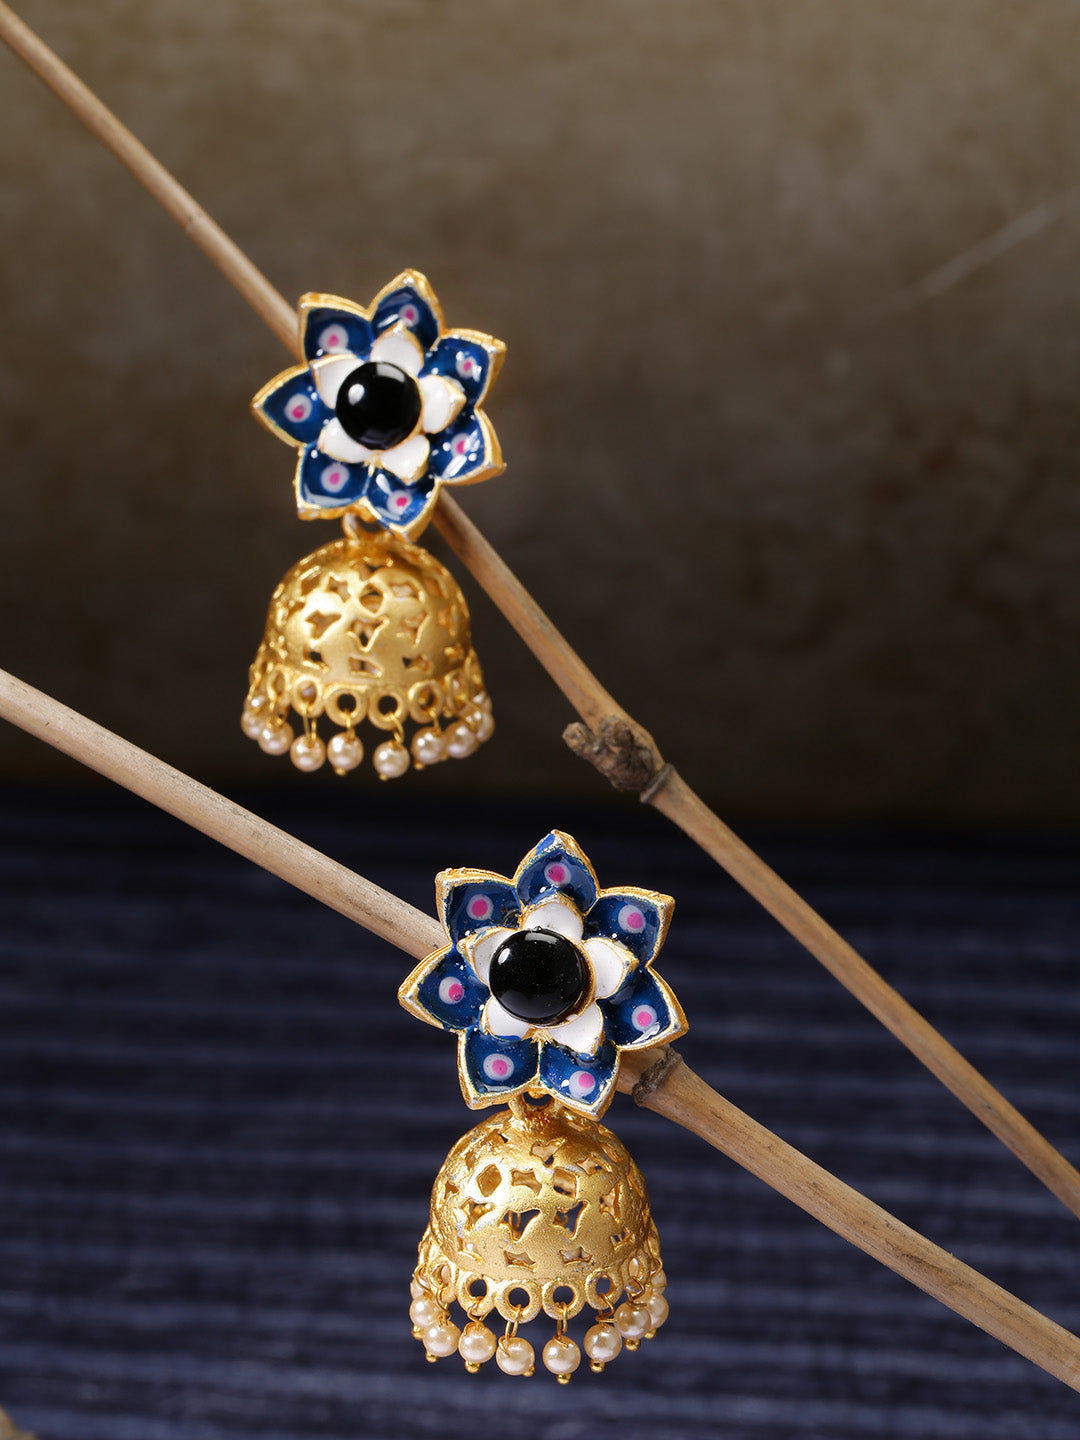 Gold-Plated Floral Patterned Jhumka Earrings in Blue and Black Color with Pearls Drop